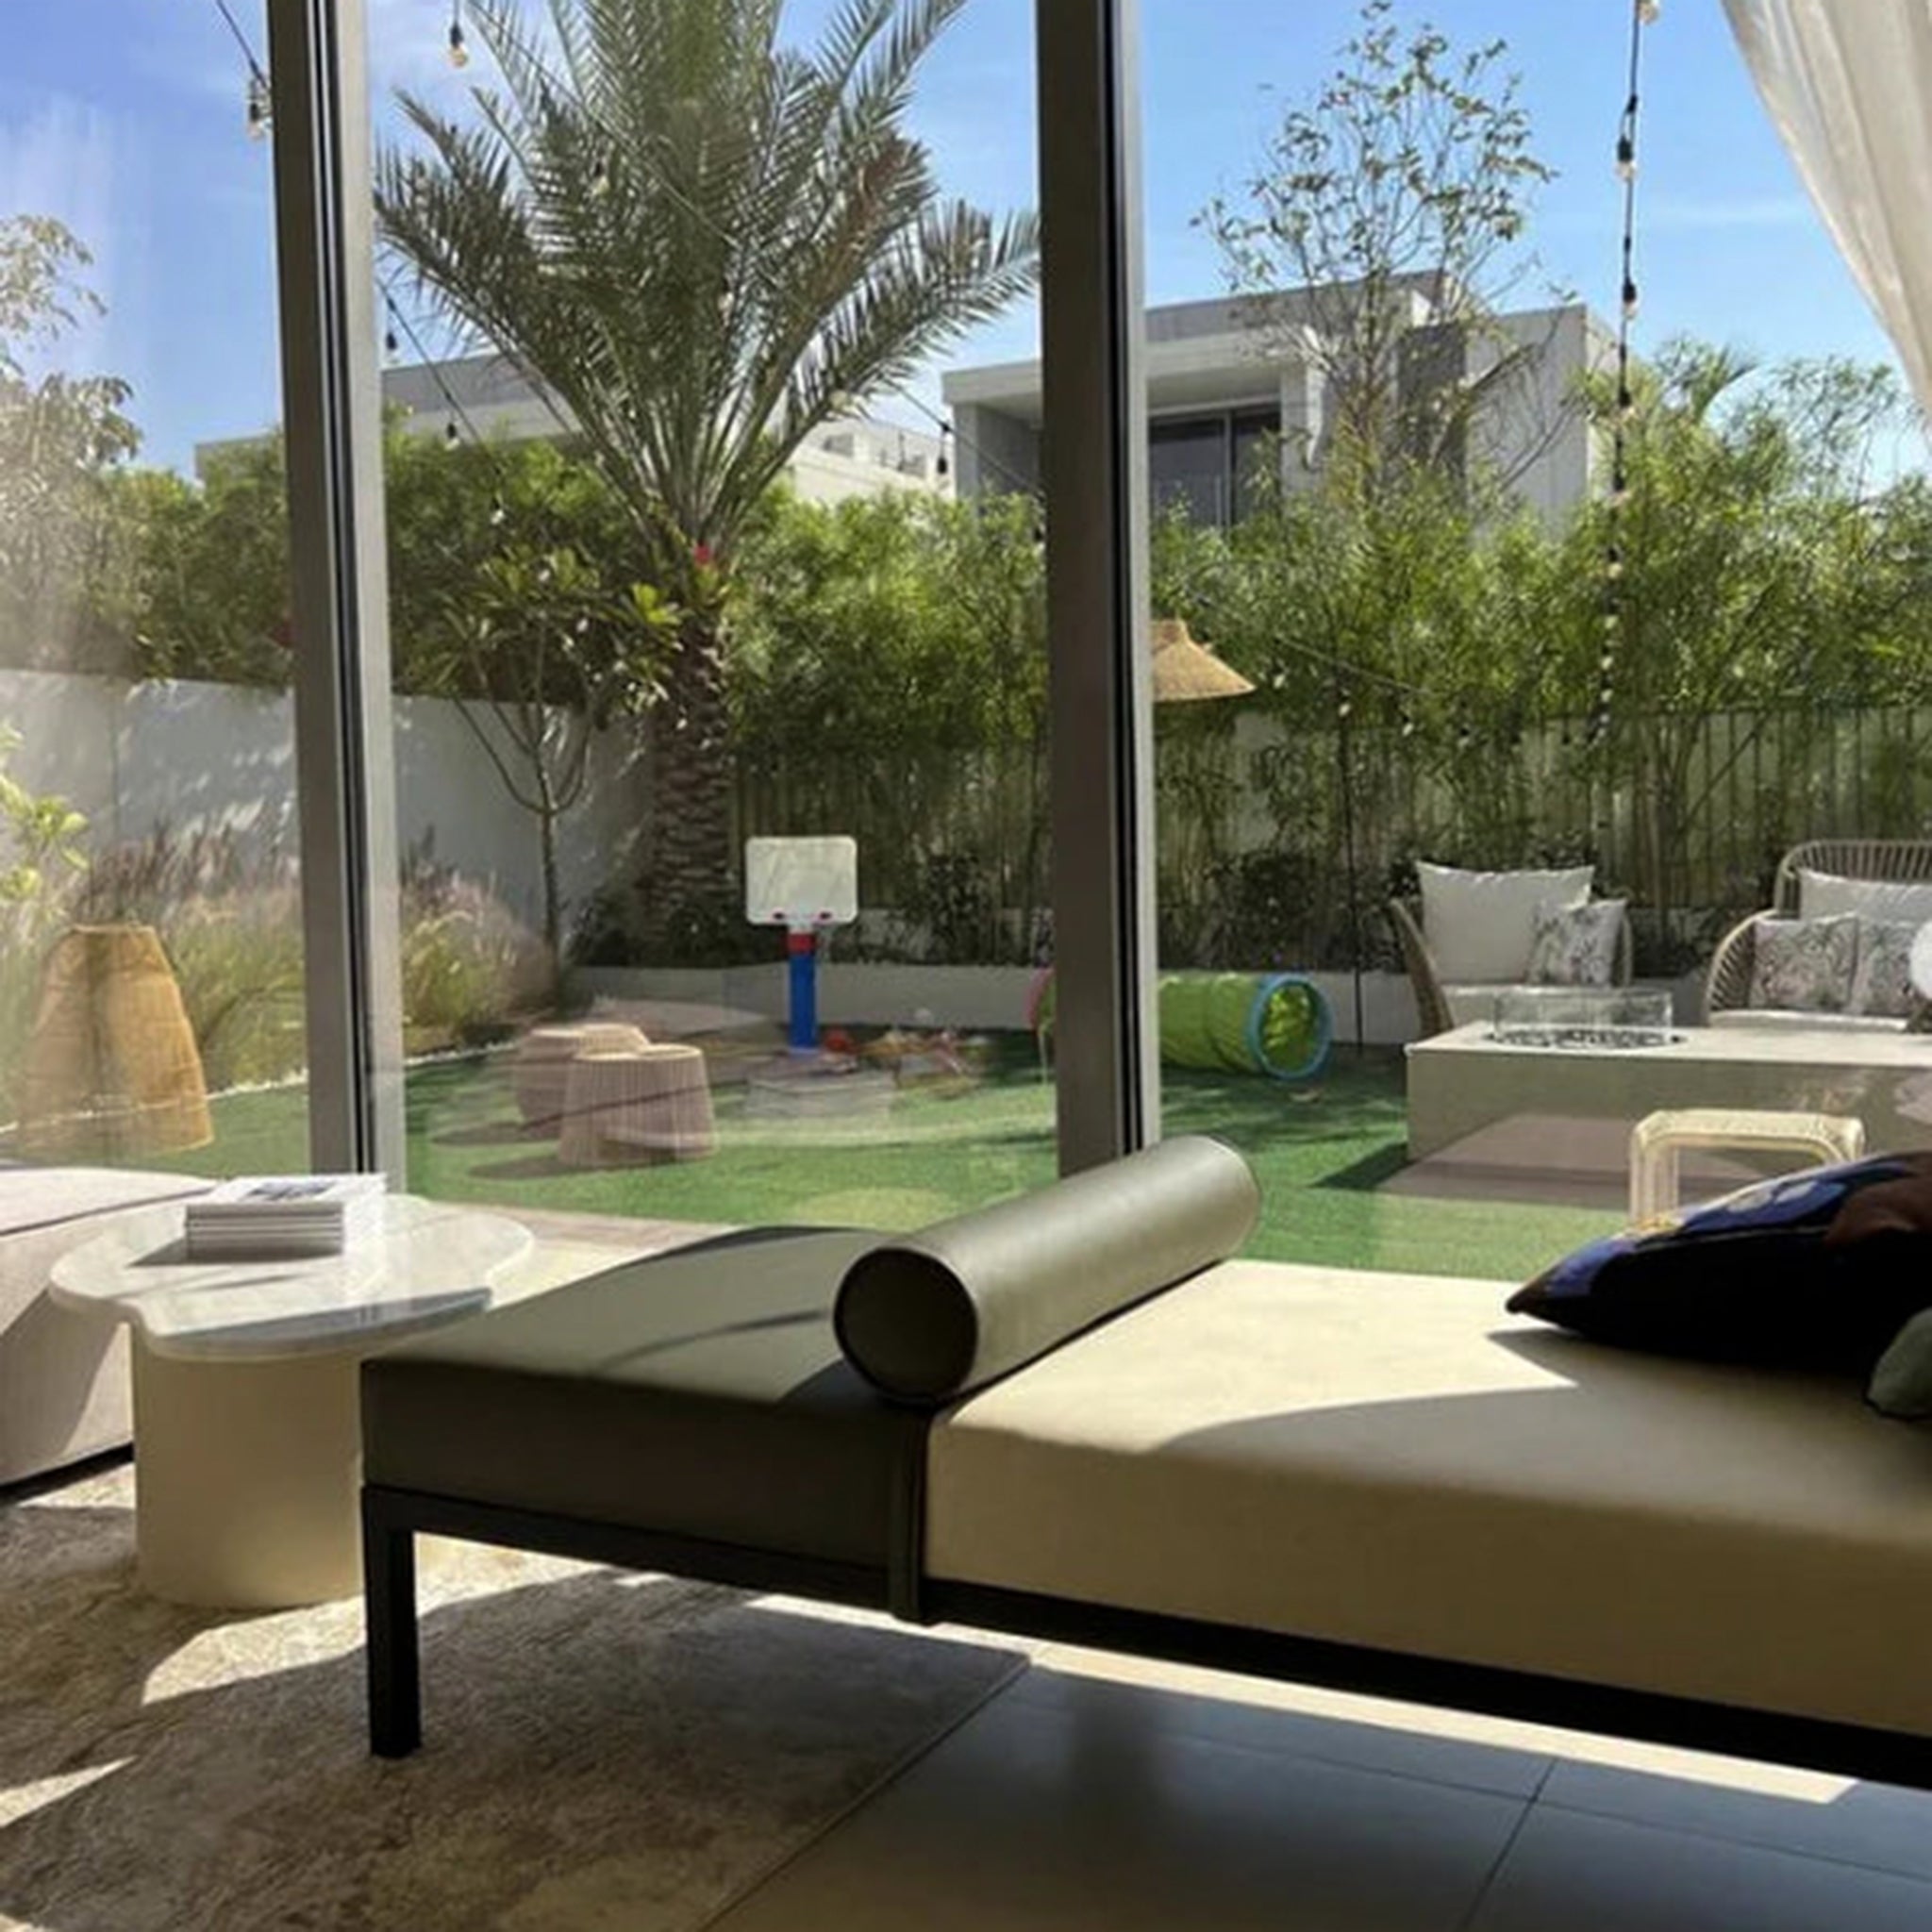 The Rodman Day Bed positioned by a large window with a view of a lush garden, showcasing its minimalist design with a Vegan Leather bolster cushion.